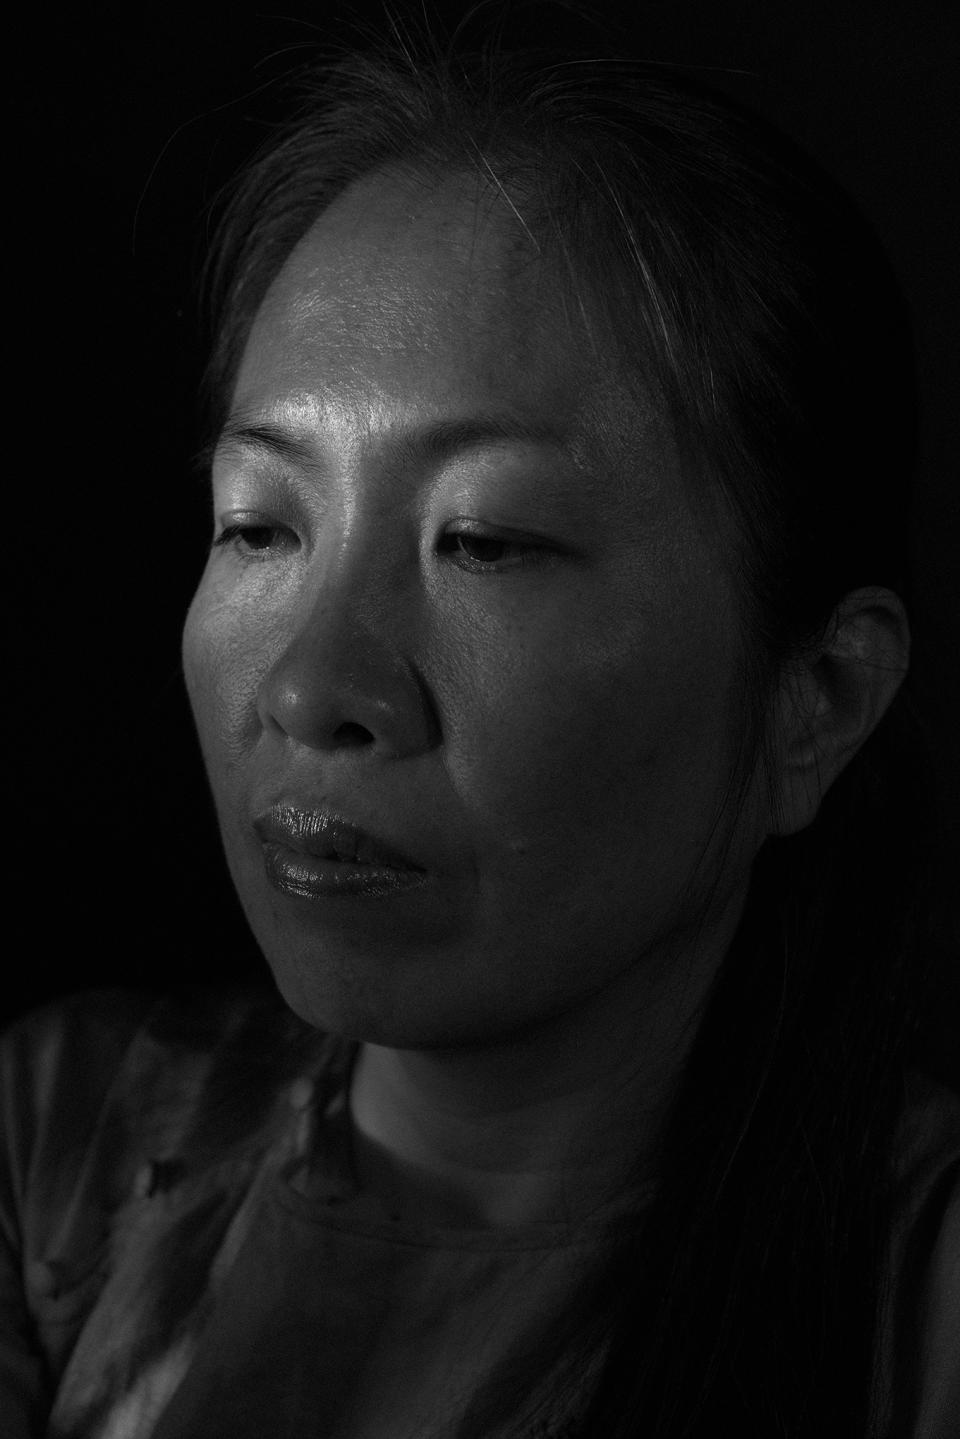 Nguyen Ngoc Nhu Quynh, known by her pen name Mother Mushroom, is a Vietnamese blogger who drew attention for criticizing the Communist Party–controlled government. In 2017, she was sentenced to 10 years in prison for “propaganda against the state.” In October, Quynh was released in a freedom-for-exile deal. Now in the U.S., she vows to continue highlighting abuses in her home country.